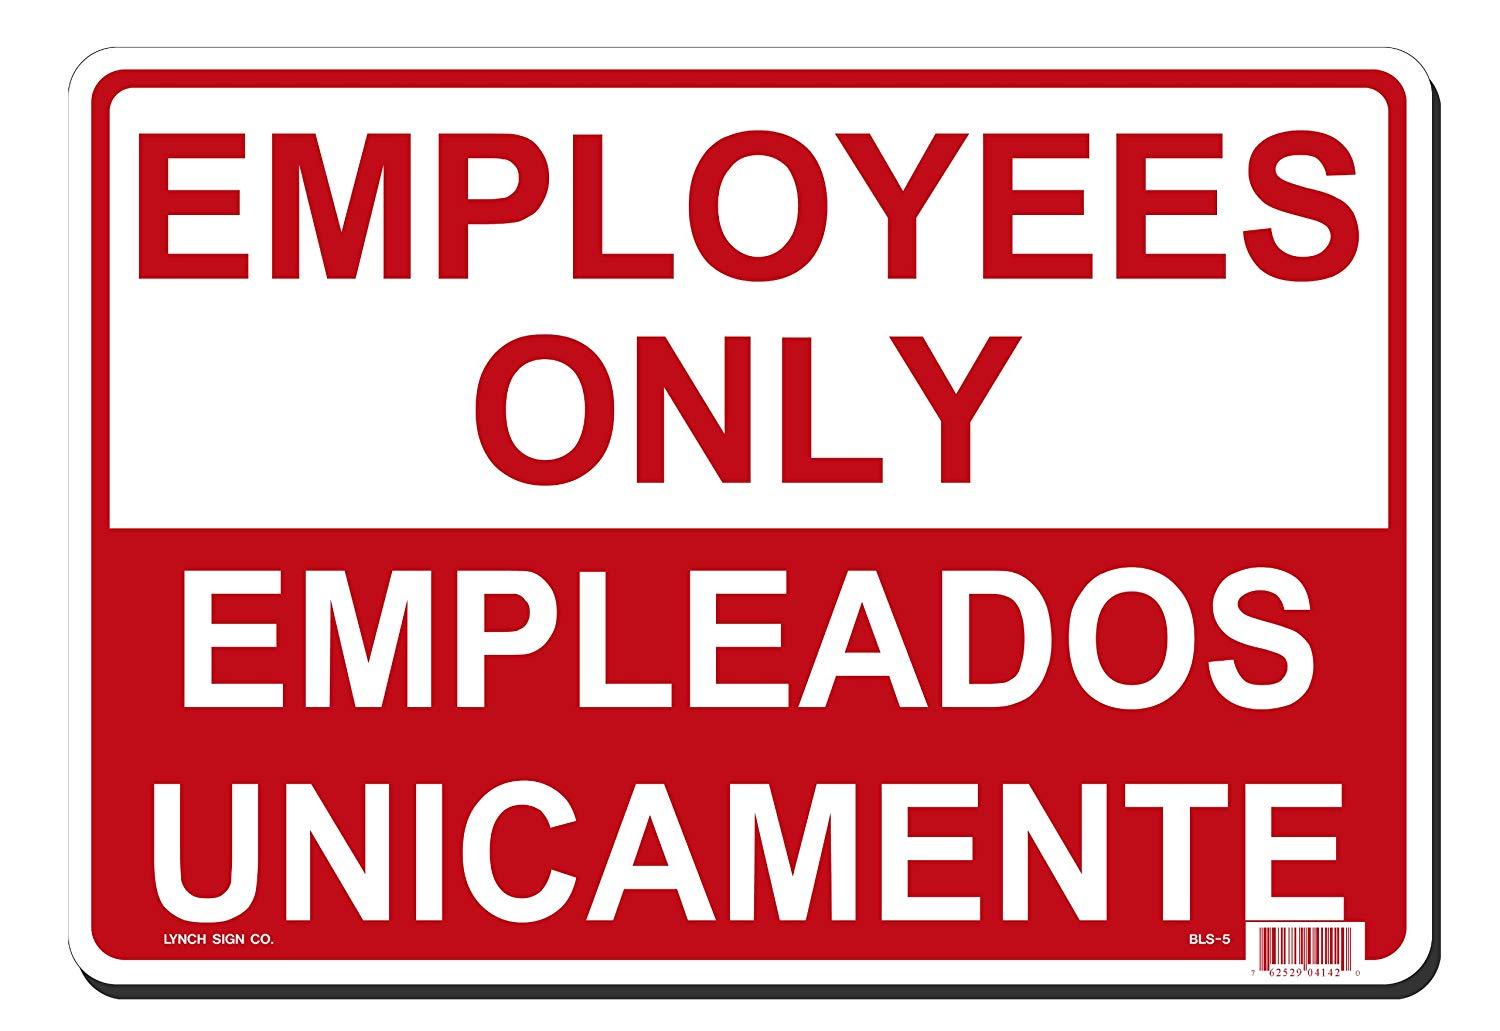 Lynch BLS-5, Employees only/Empleados unicamente, Red and White, 14" x 10"